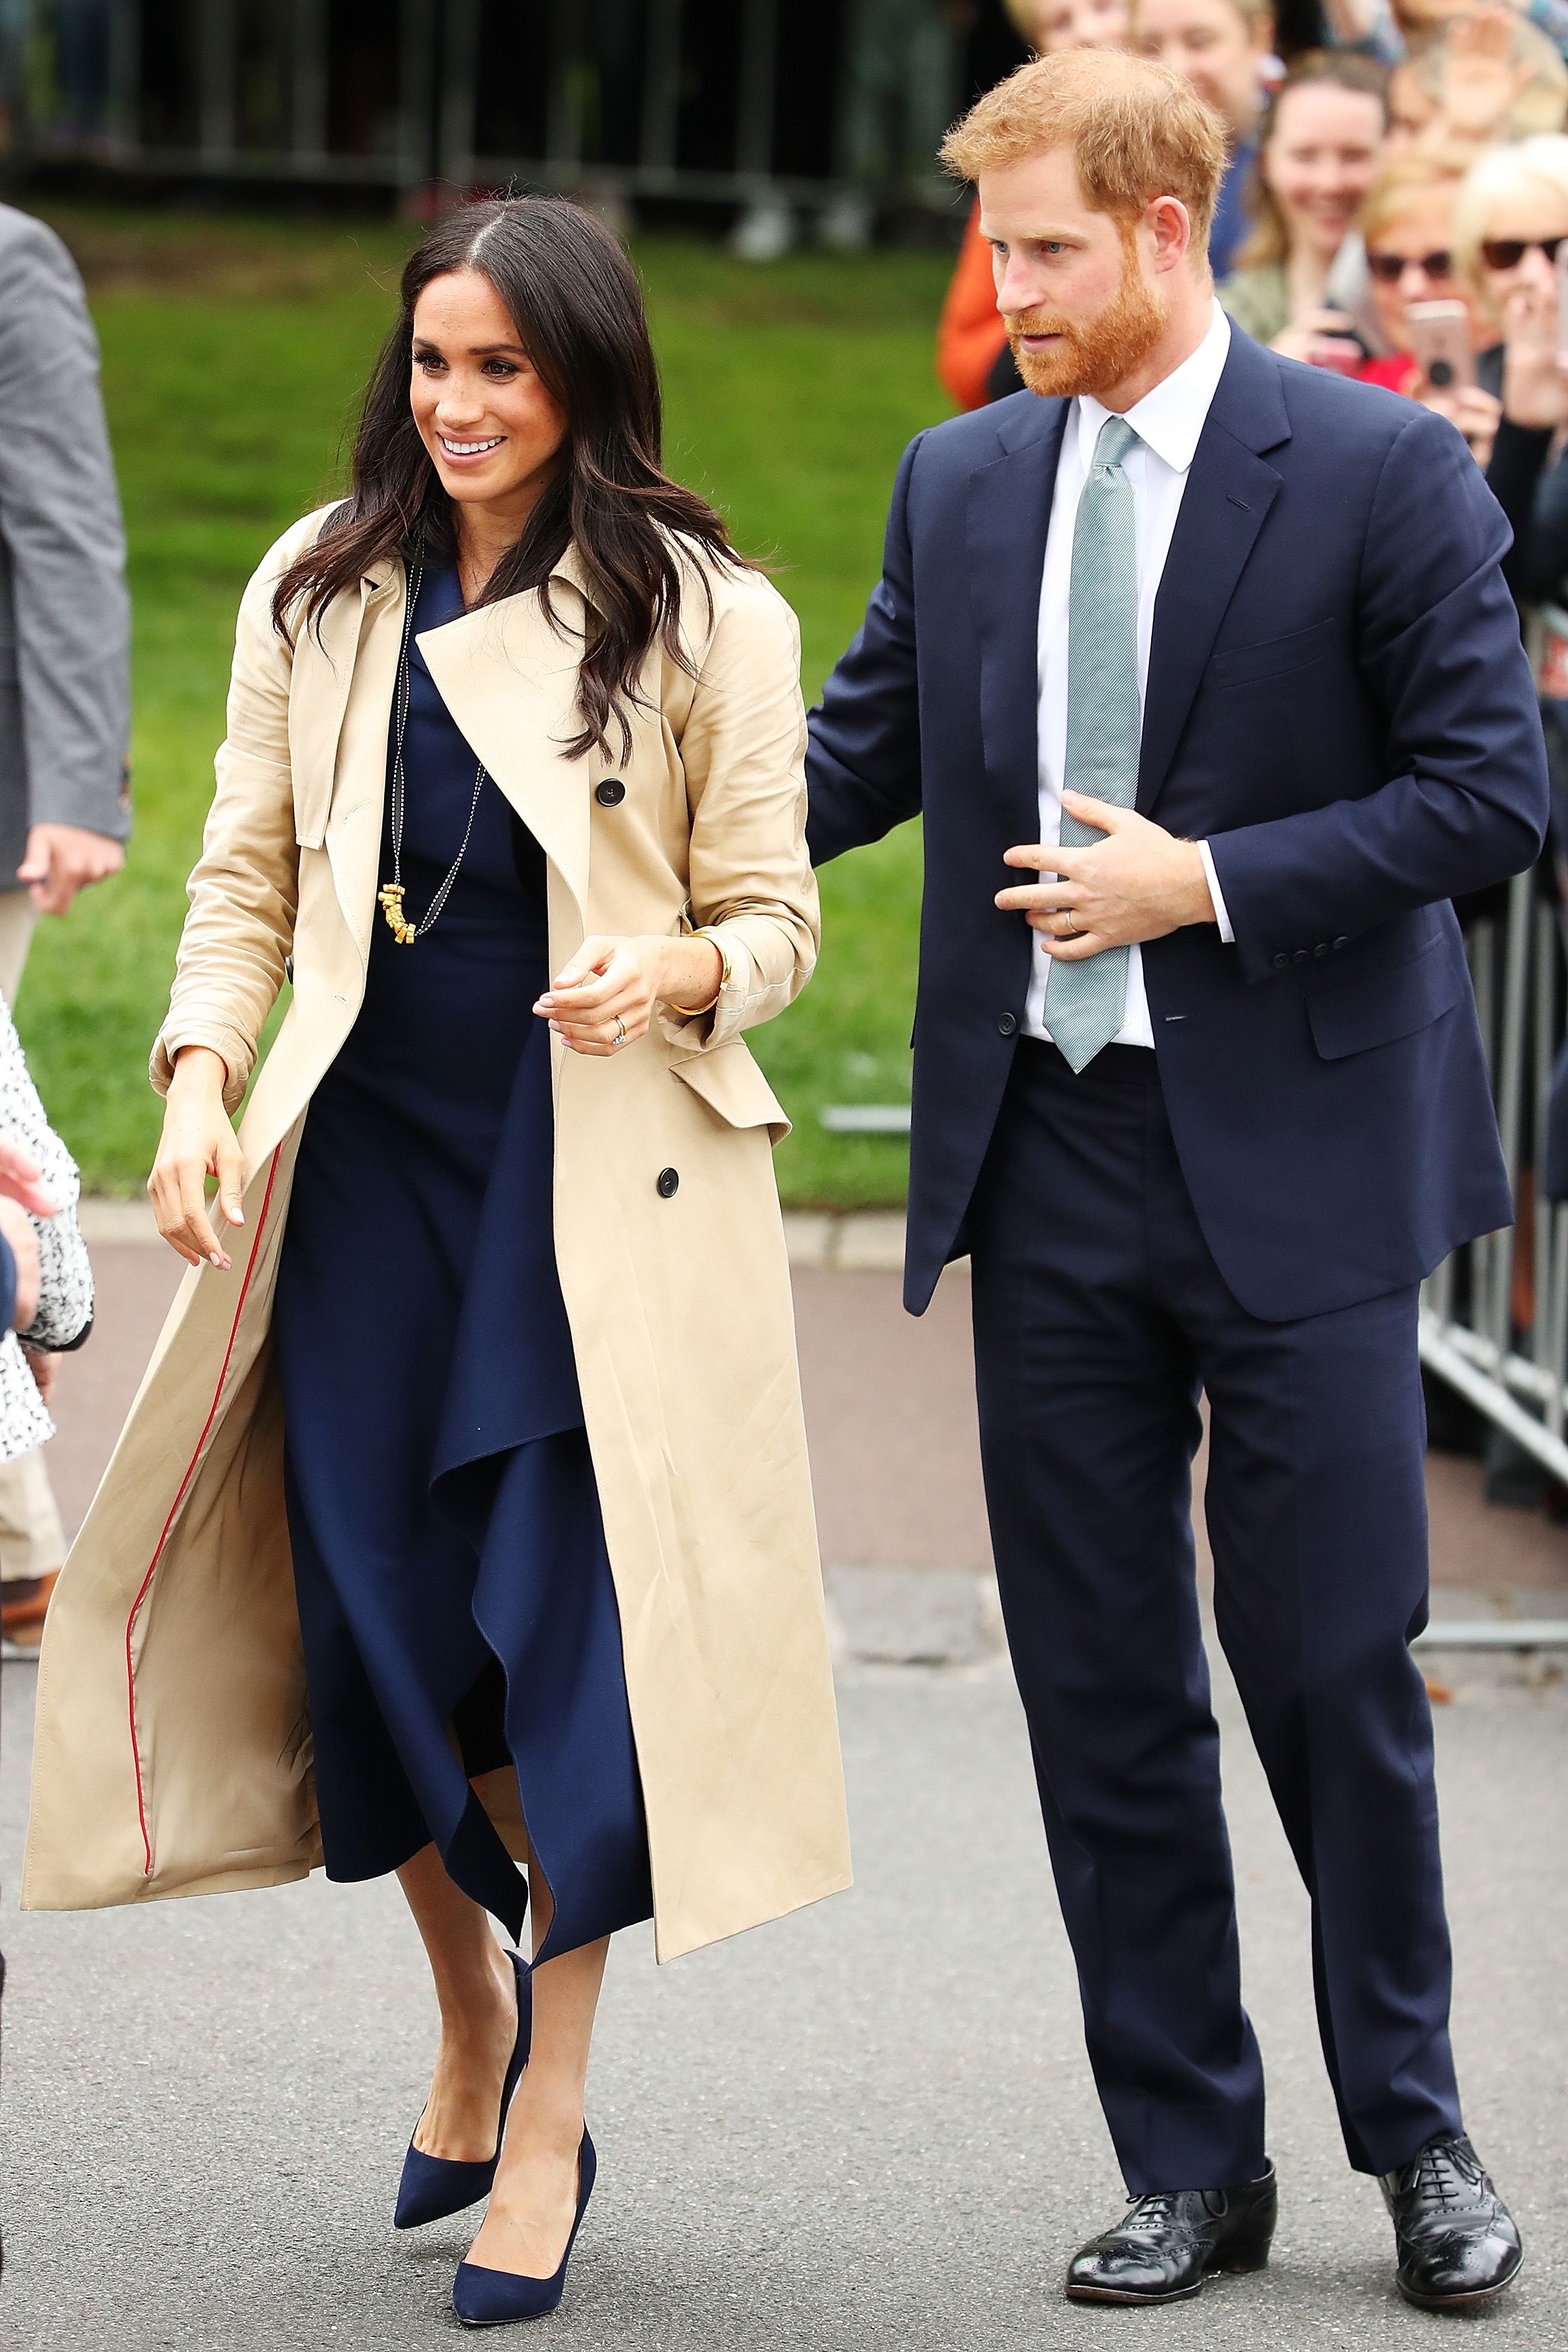 12 Things You Missed From Meghan Markle and Prince Harry's Royal Tour